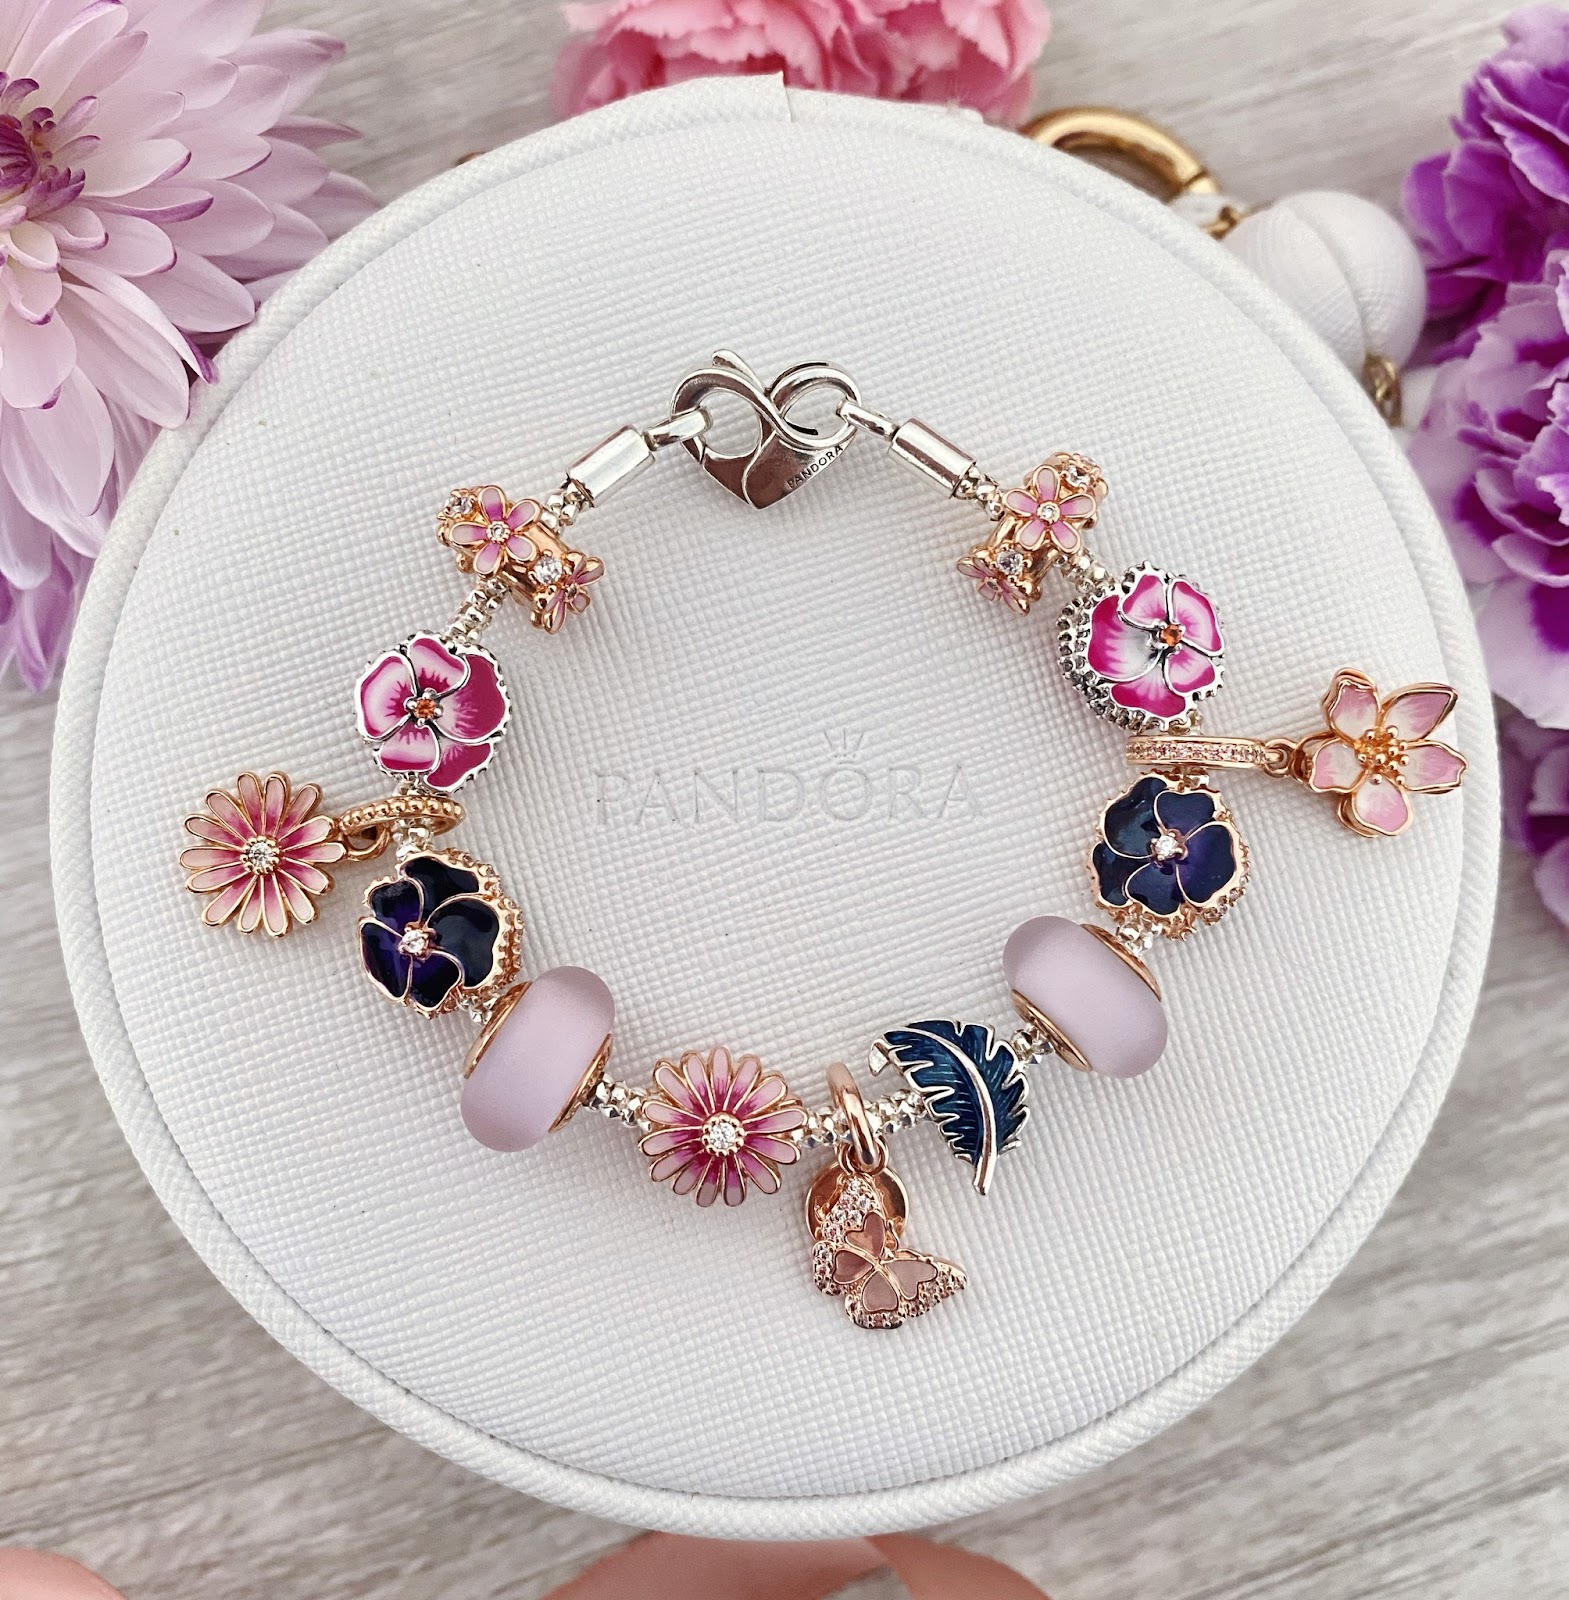 Gold bracelet made up of pink and purple flower shaped charms